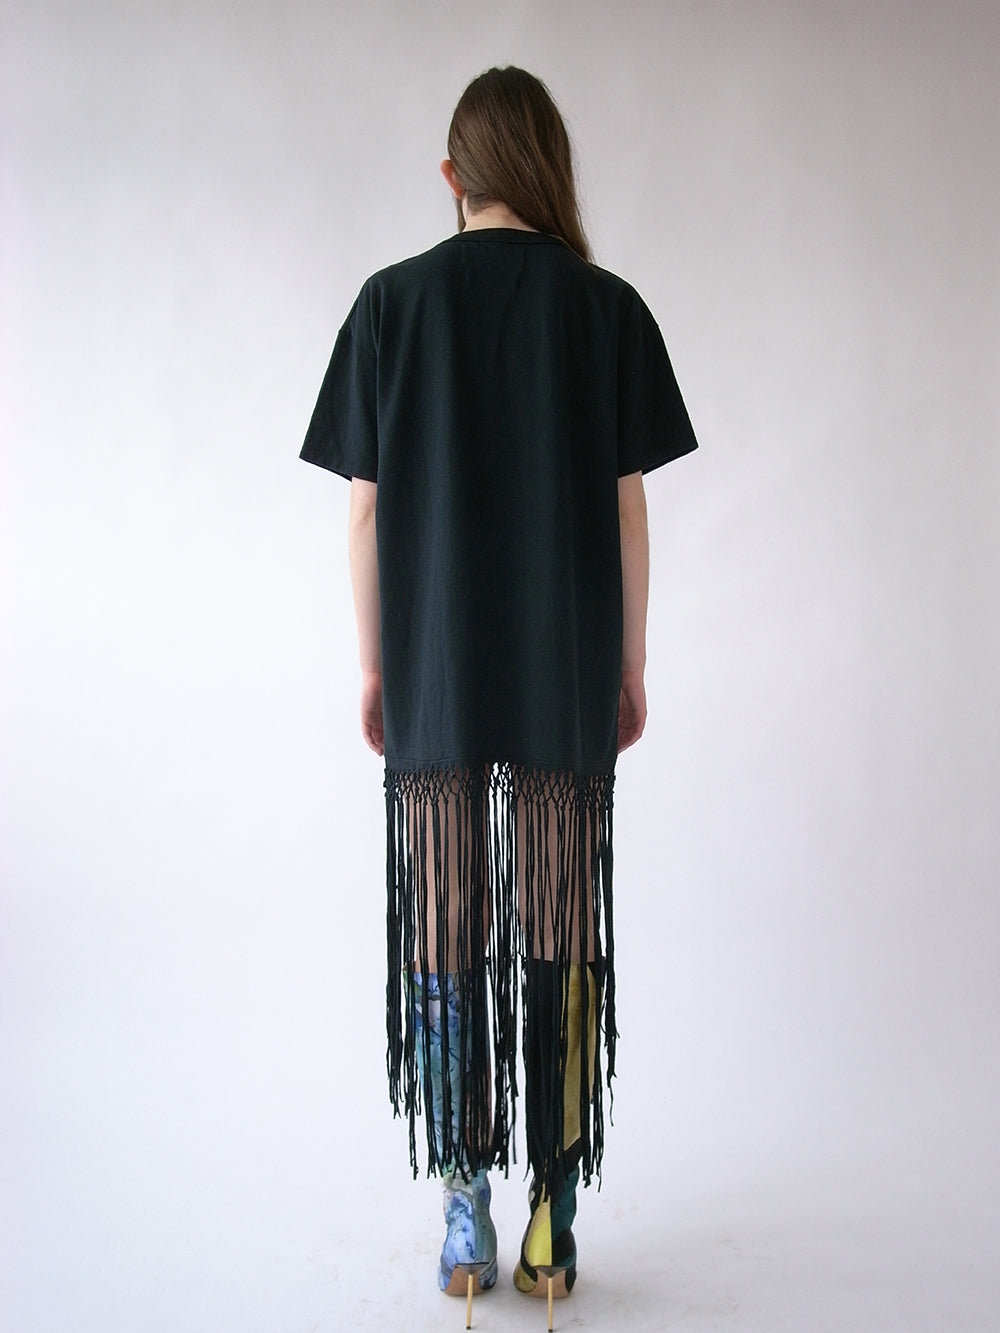 The Reconstituted Macrame T-shirt Dress